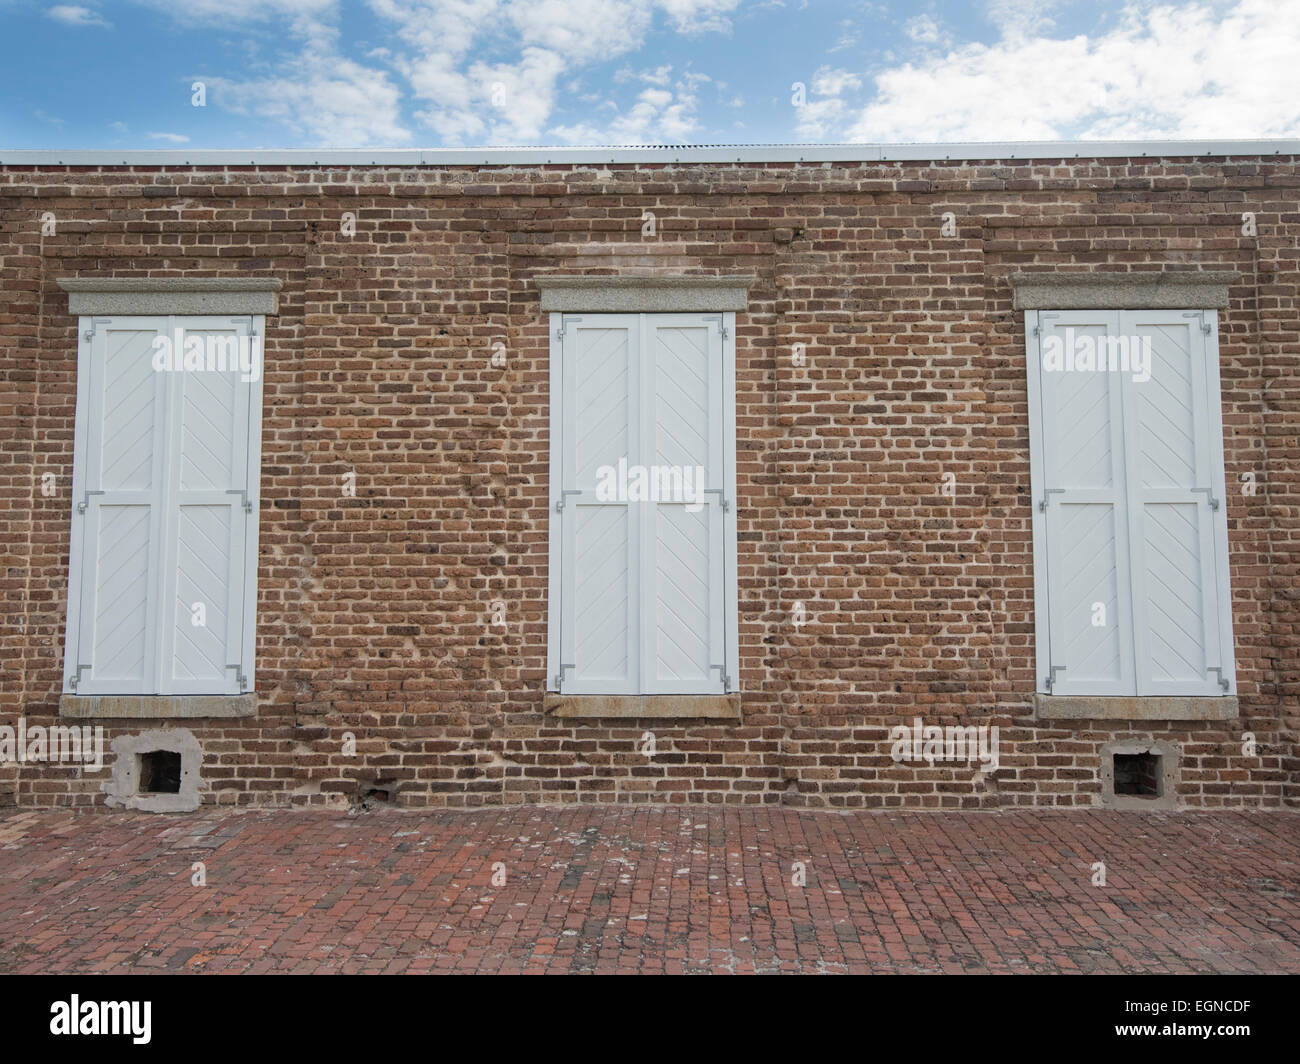 Three white shutters on a red brick building under a blue sky Stock Photo